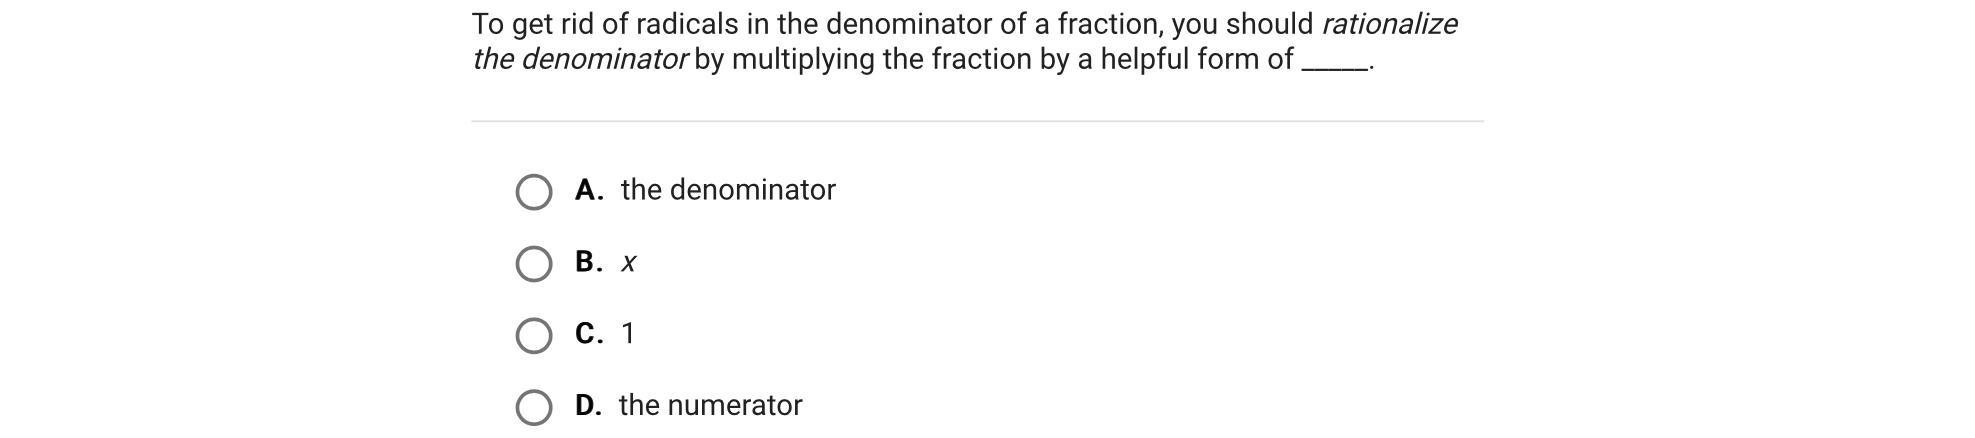 To Get Rid Of Radicals In The Denominator Of A Fraction, You Should Rationalize The Denominator By Multiplying